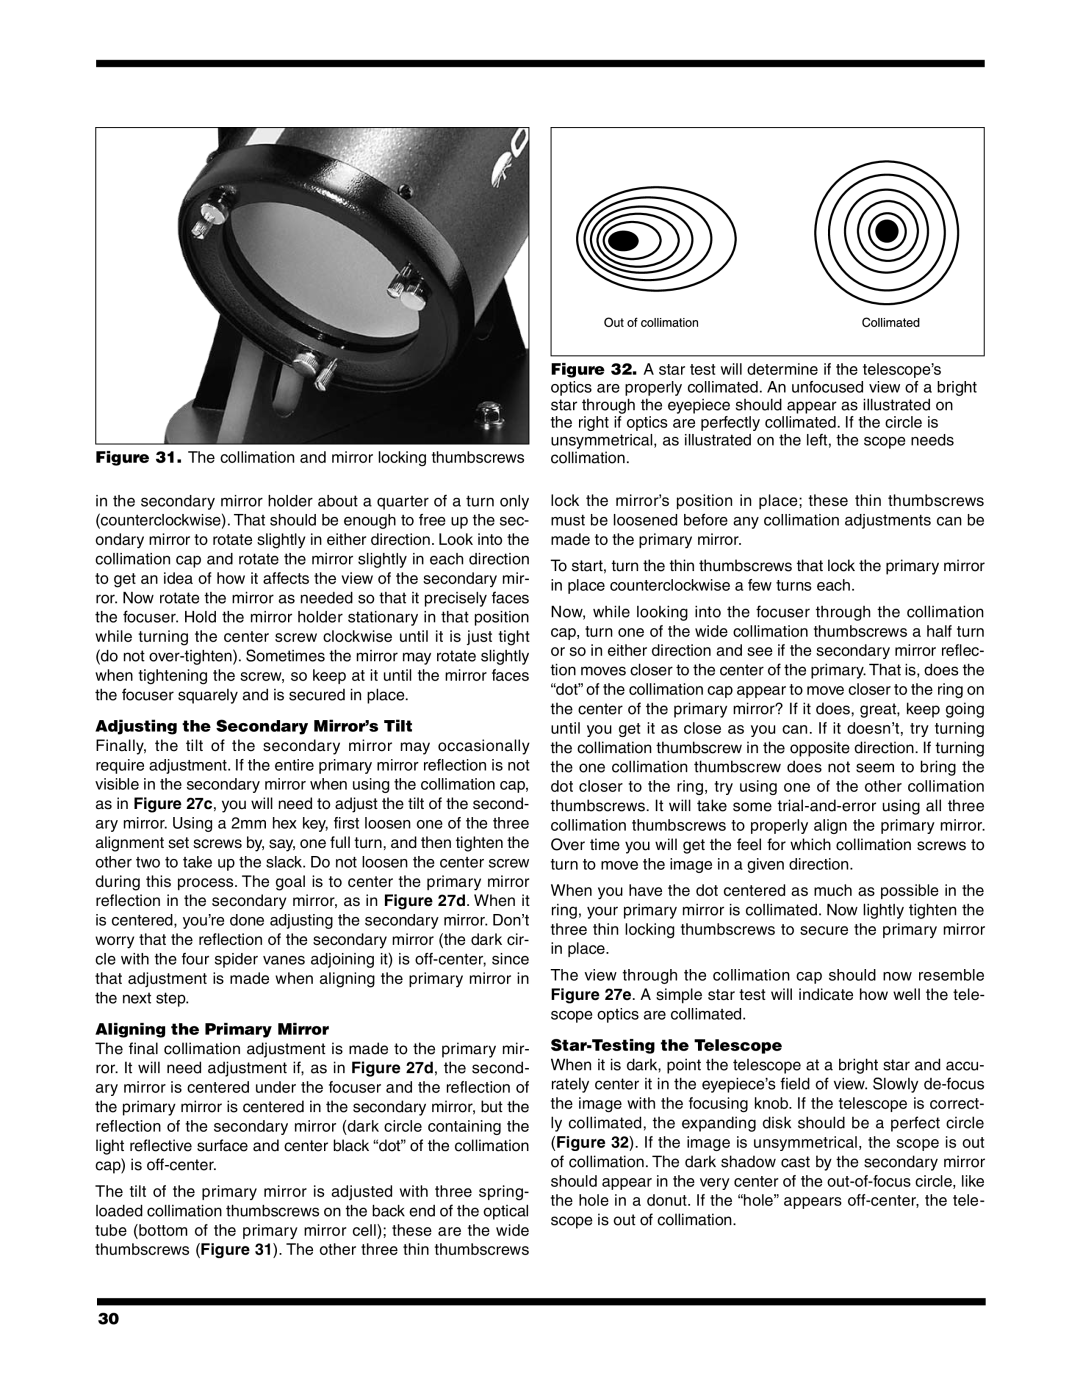 Orion 6/6I instruction manual Adjusting the Secondary Mirror’s Tilt, Aligning the Primary Mirror, Star-Testingthe Telescope 